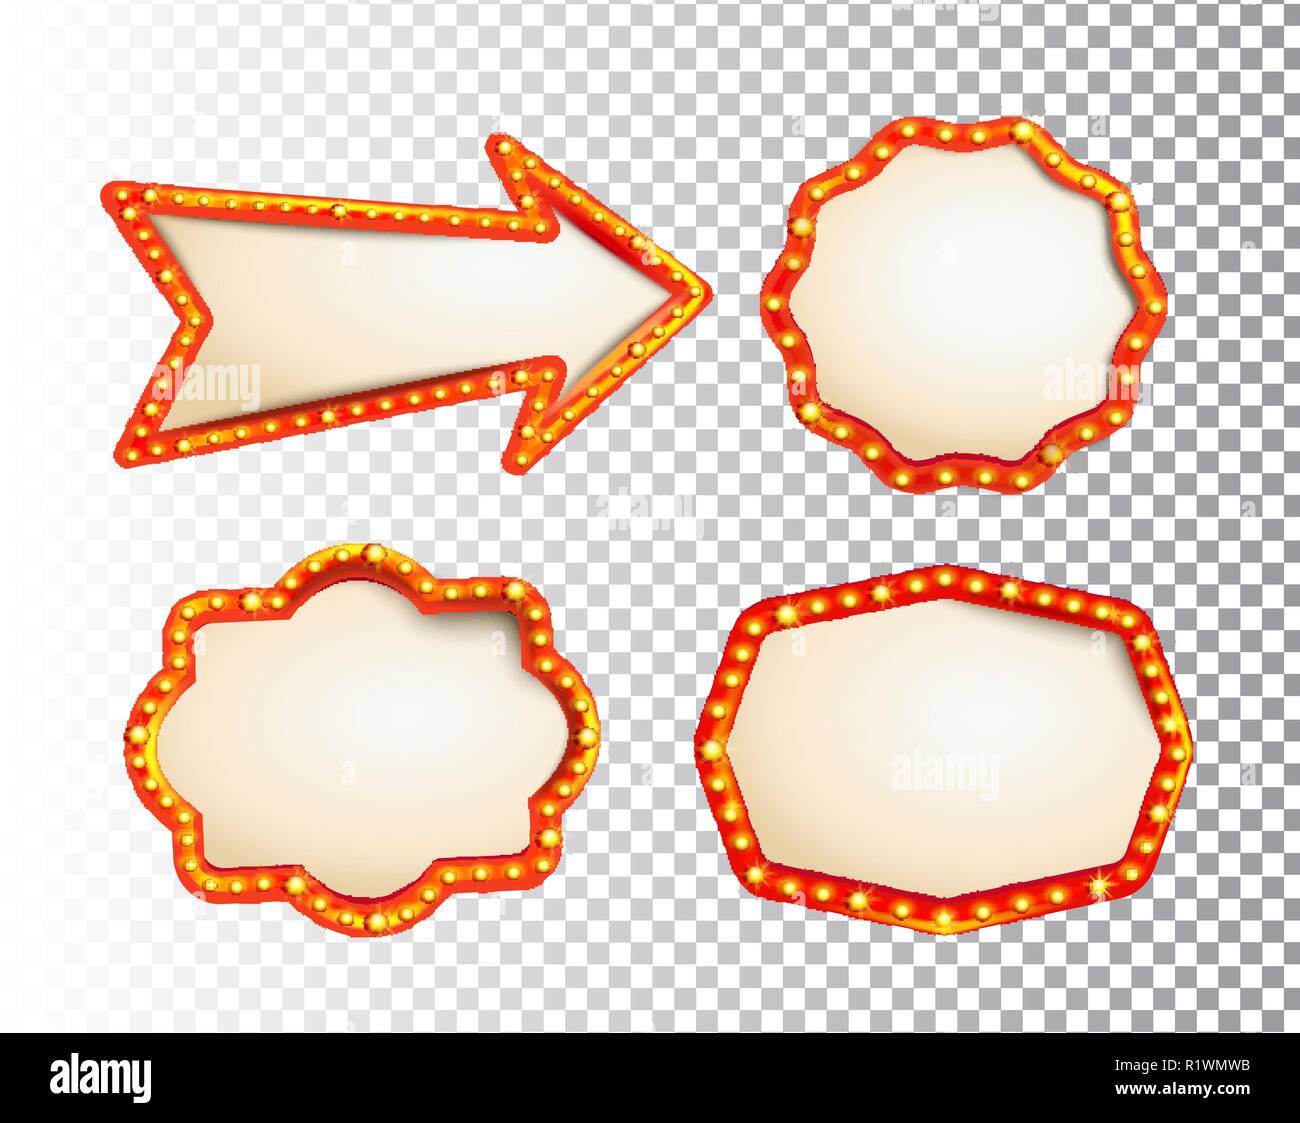 Shining isolated retroset bulb light frames and arrow on transparent background. Vintage style banner, sign, signboard. Perfect template for shows, casino, cinema, circus. Vector illustration EPS 10 Stock Vector